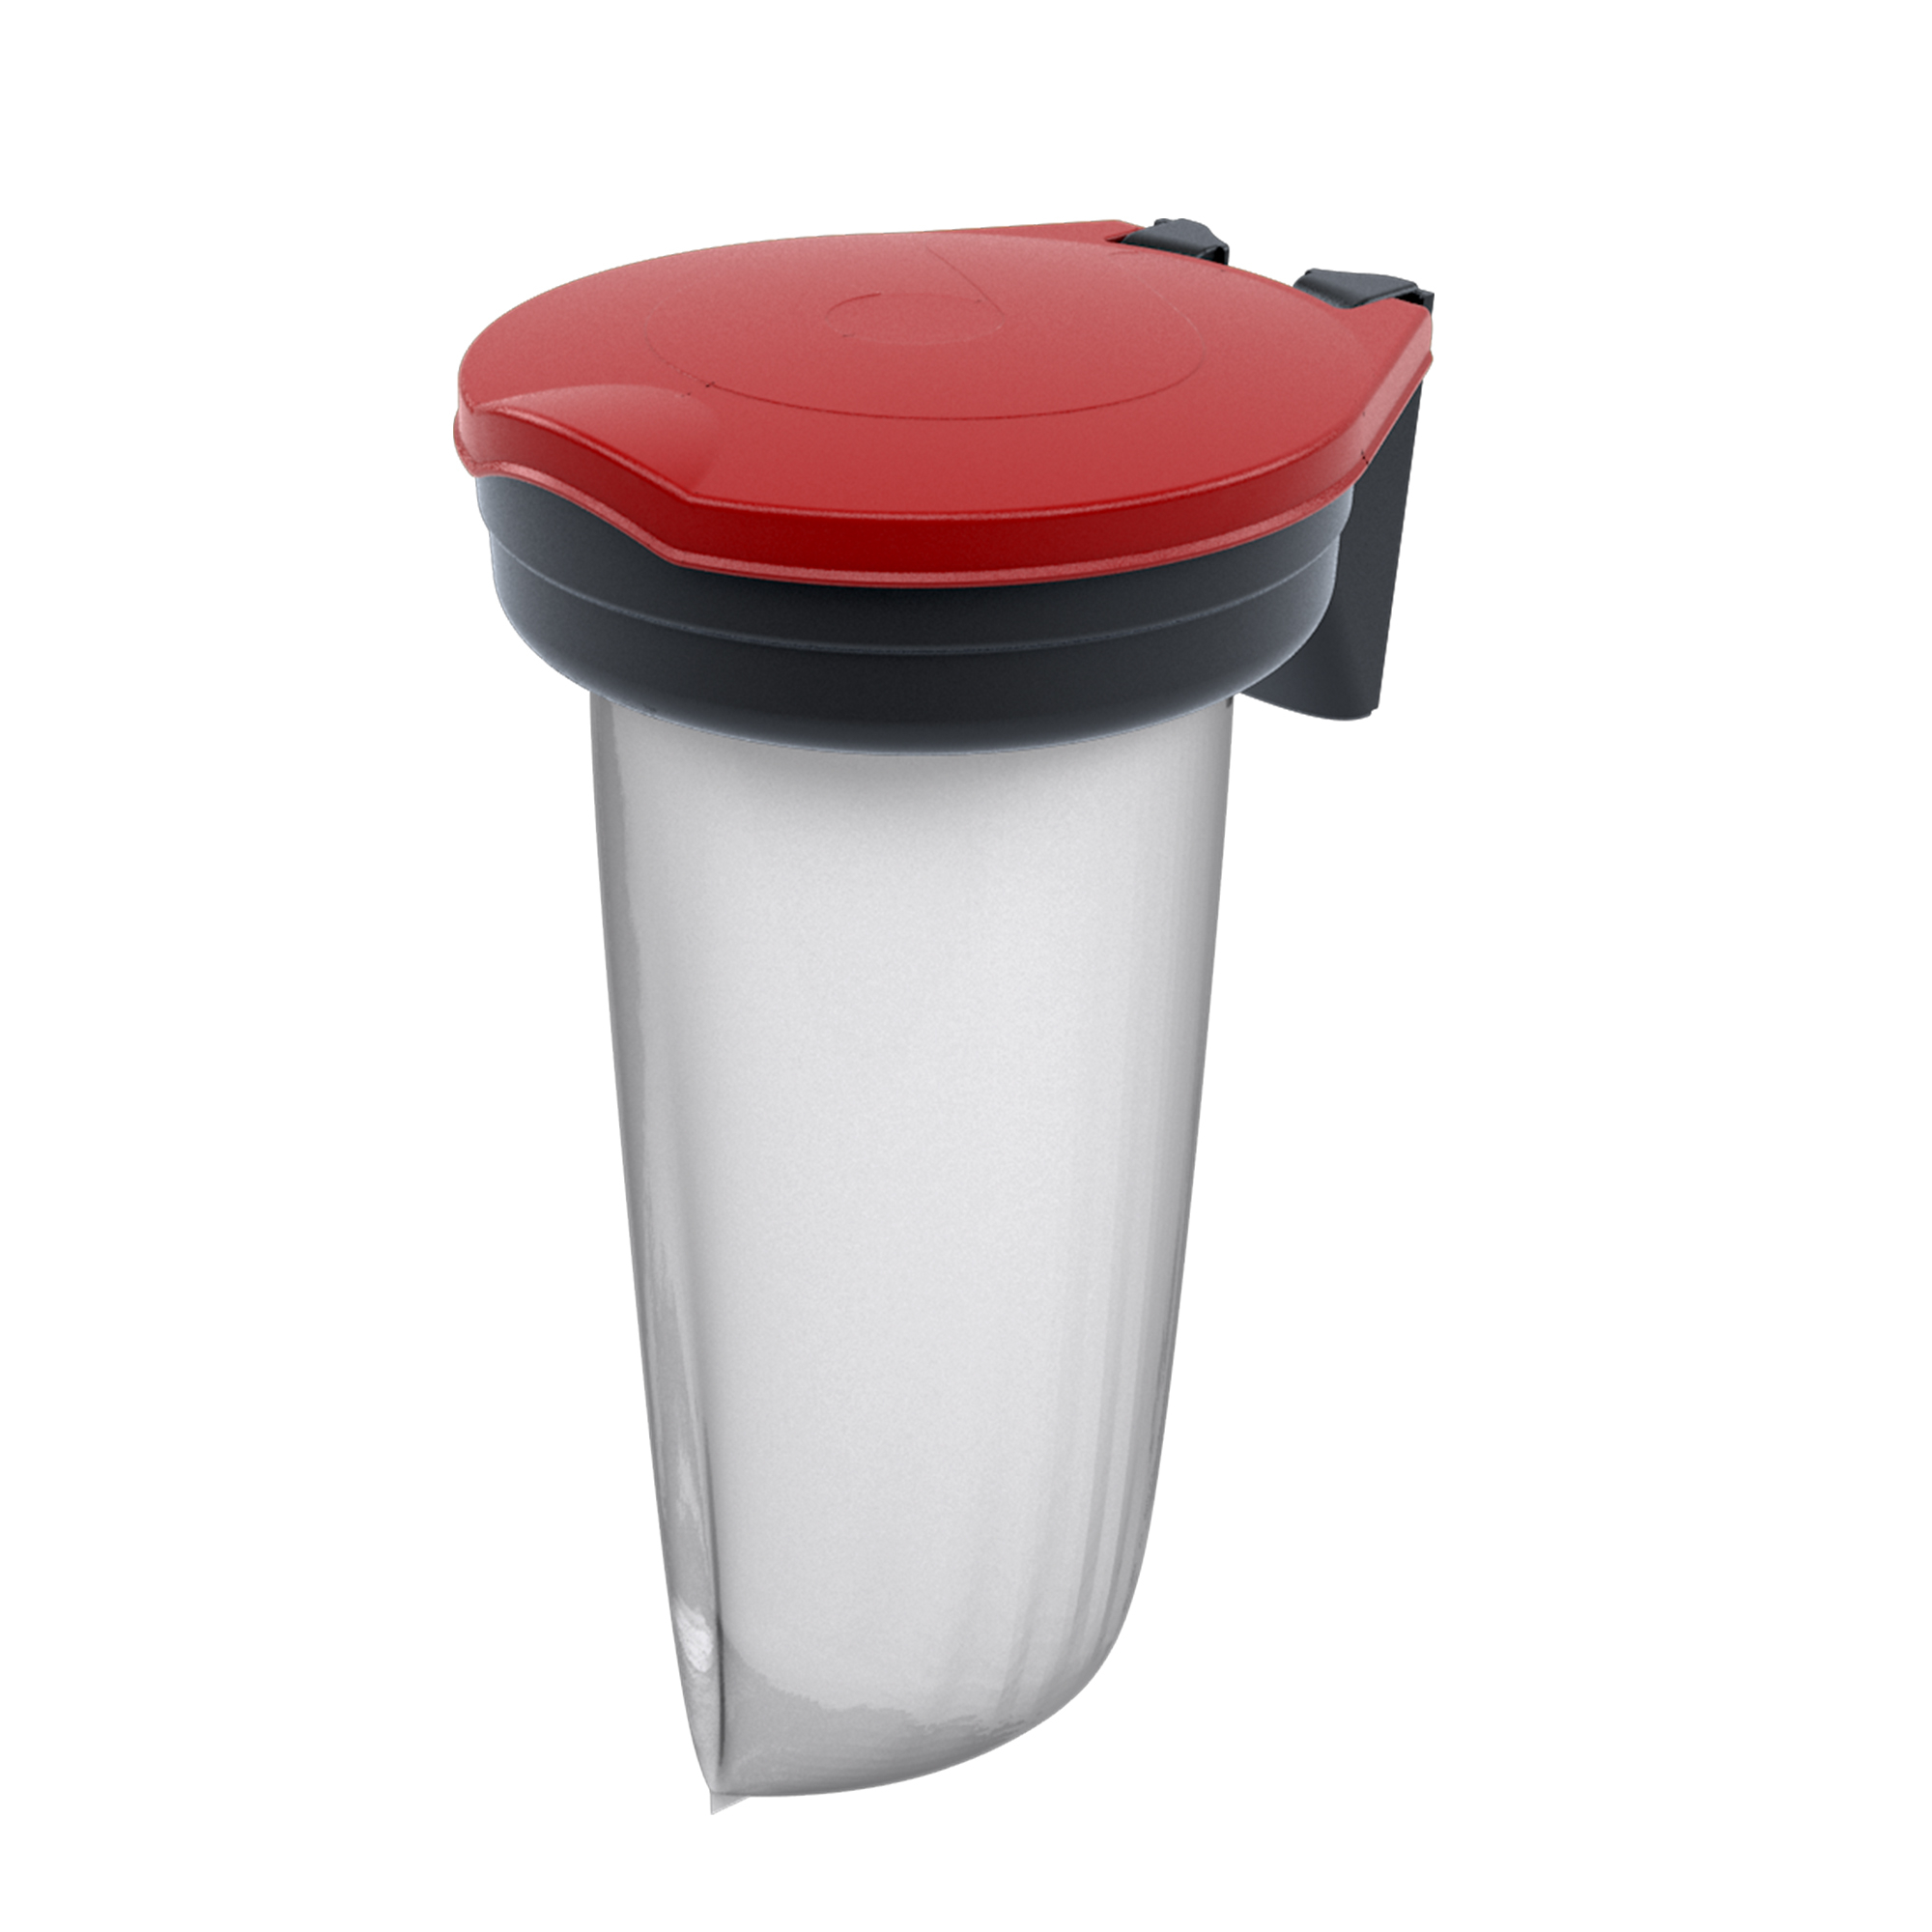 Skipper™ Barrier Recycling Bin Red Lid - Is Suitable For Indoor and Outdoor Use